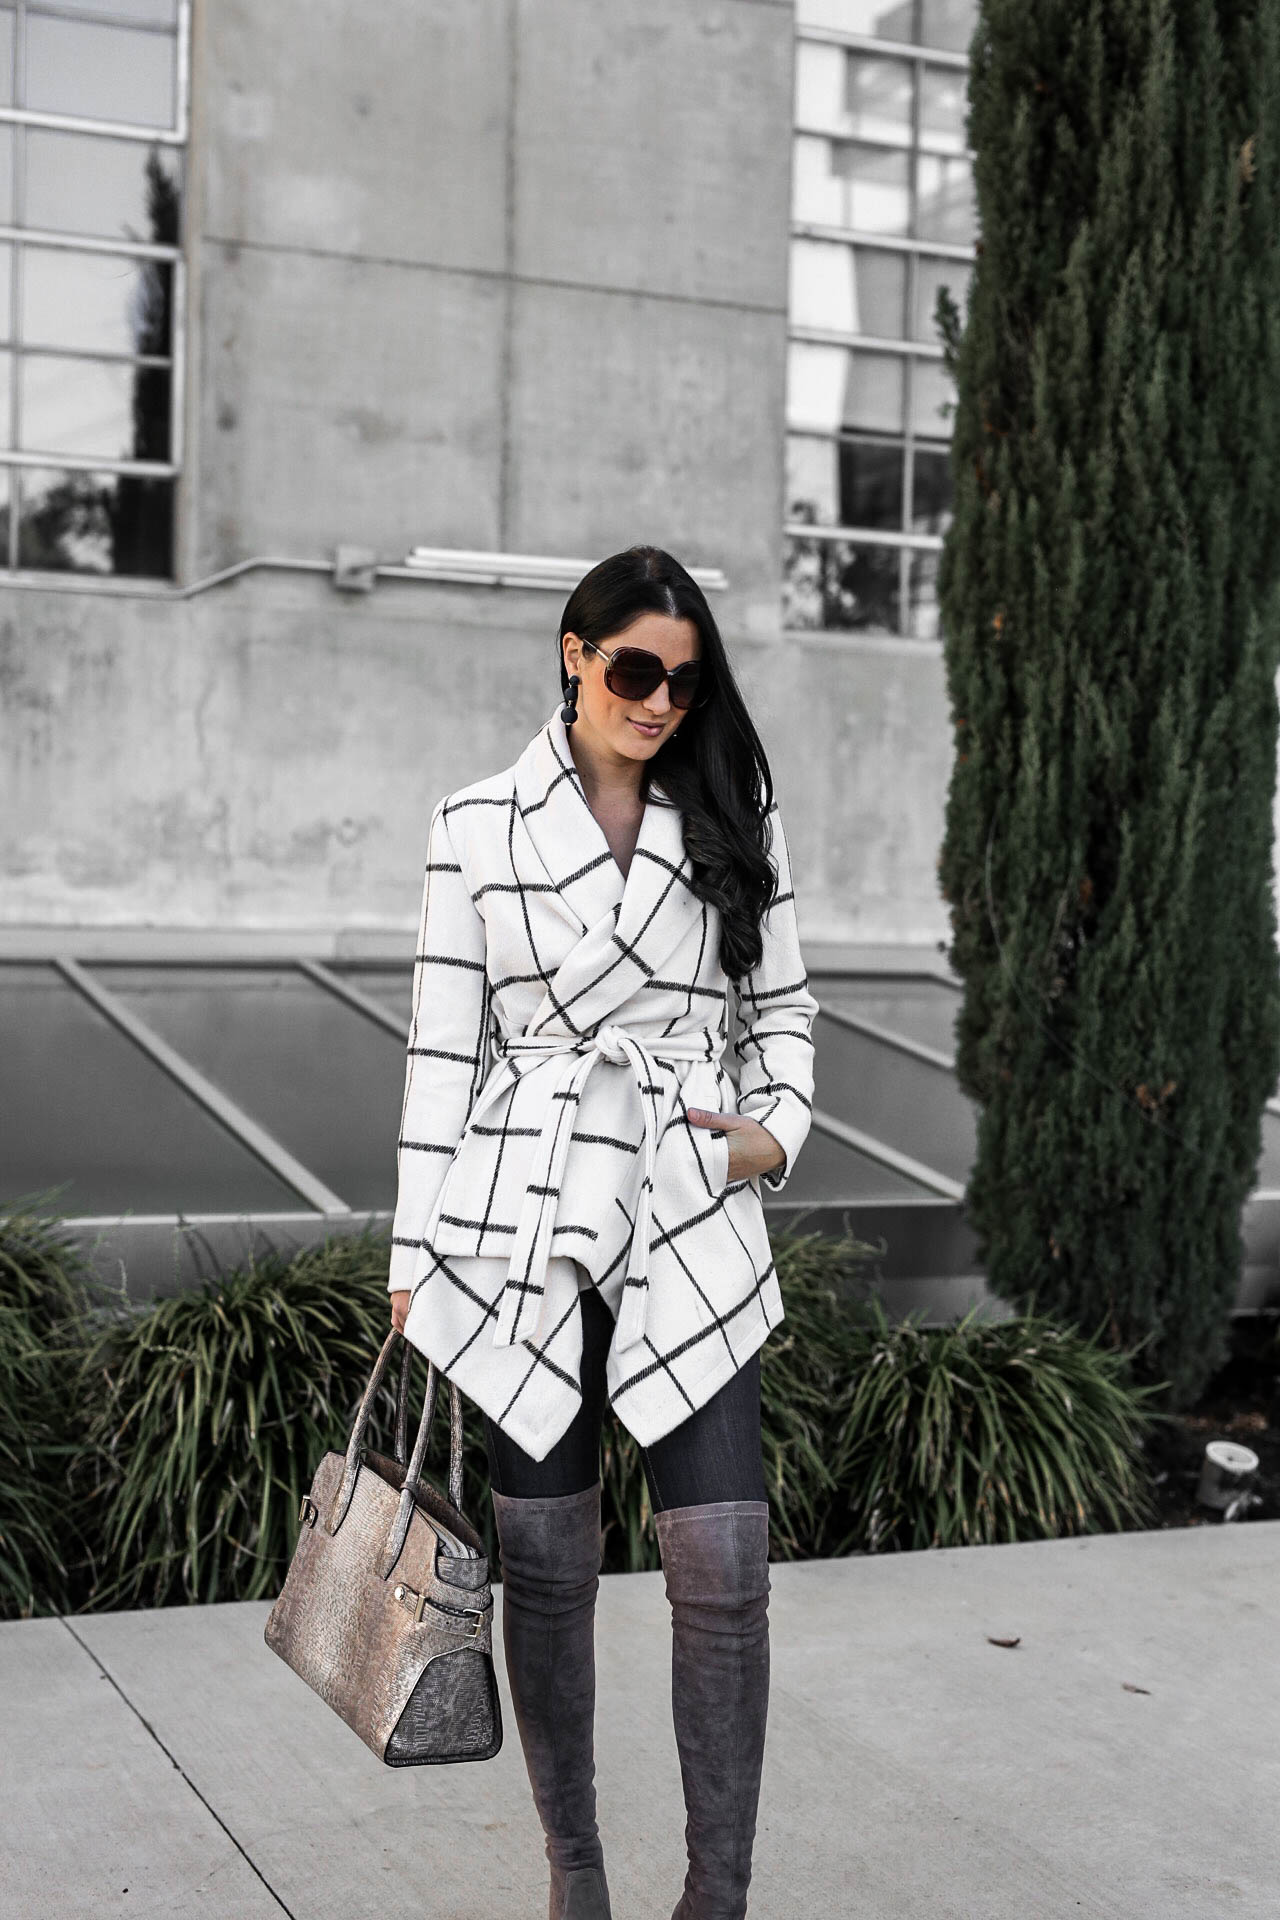 12 Wrap Coats Inspired by Meghan Markle's Engagement Outfit | how to style a wrap coat | wrap coat outfit ideas | winter coats | winter fashion tips || Dressed to Kill #wrapcoat #wintercoats #winterstyle